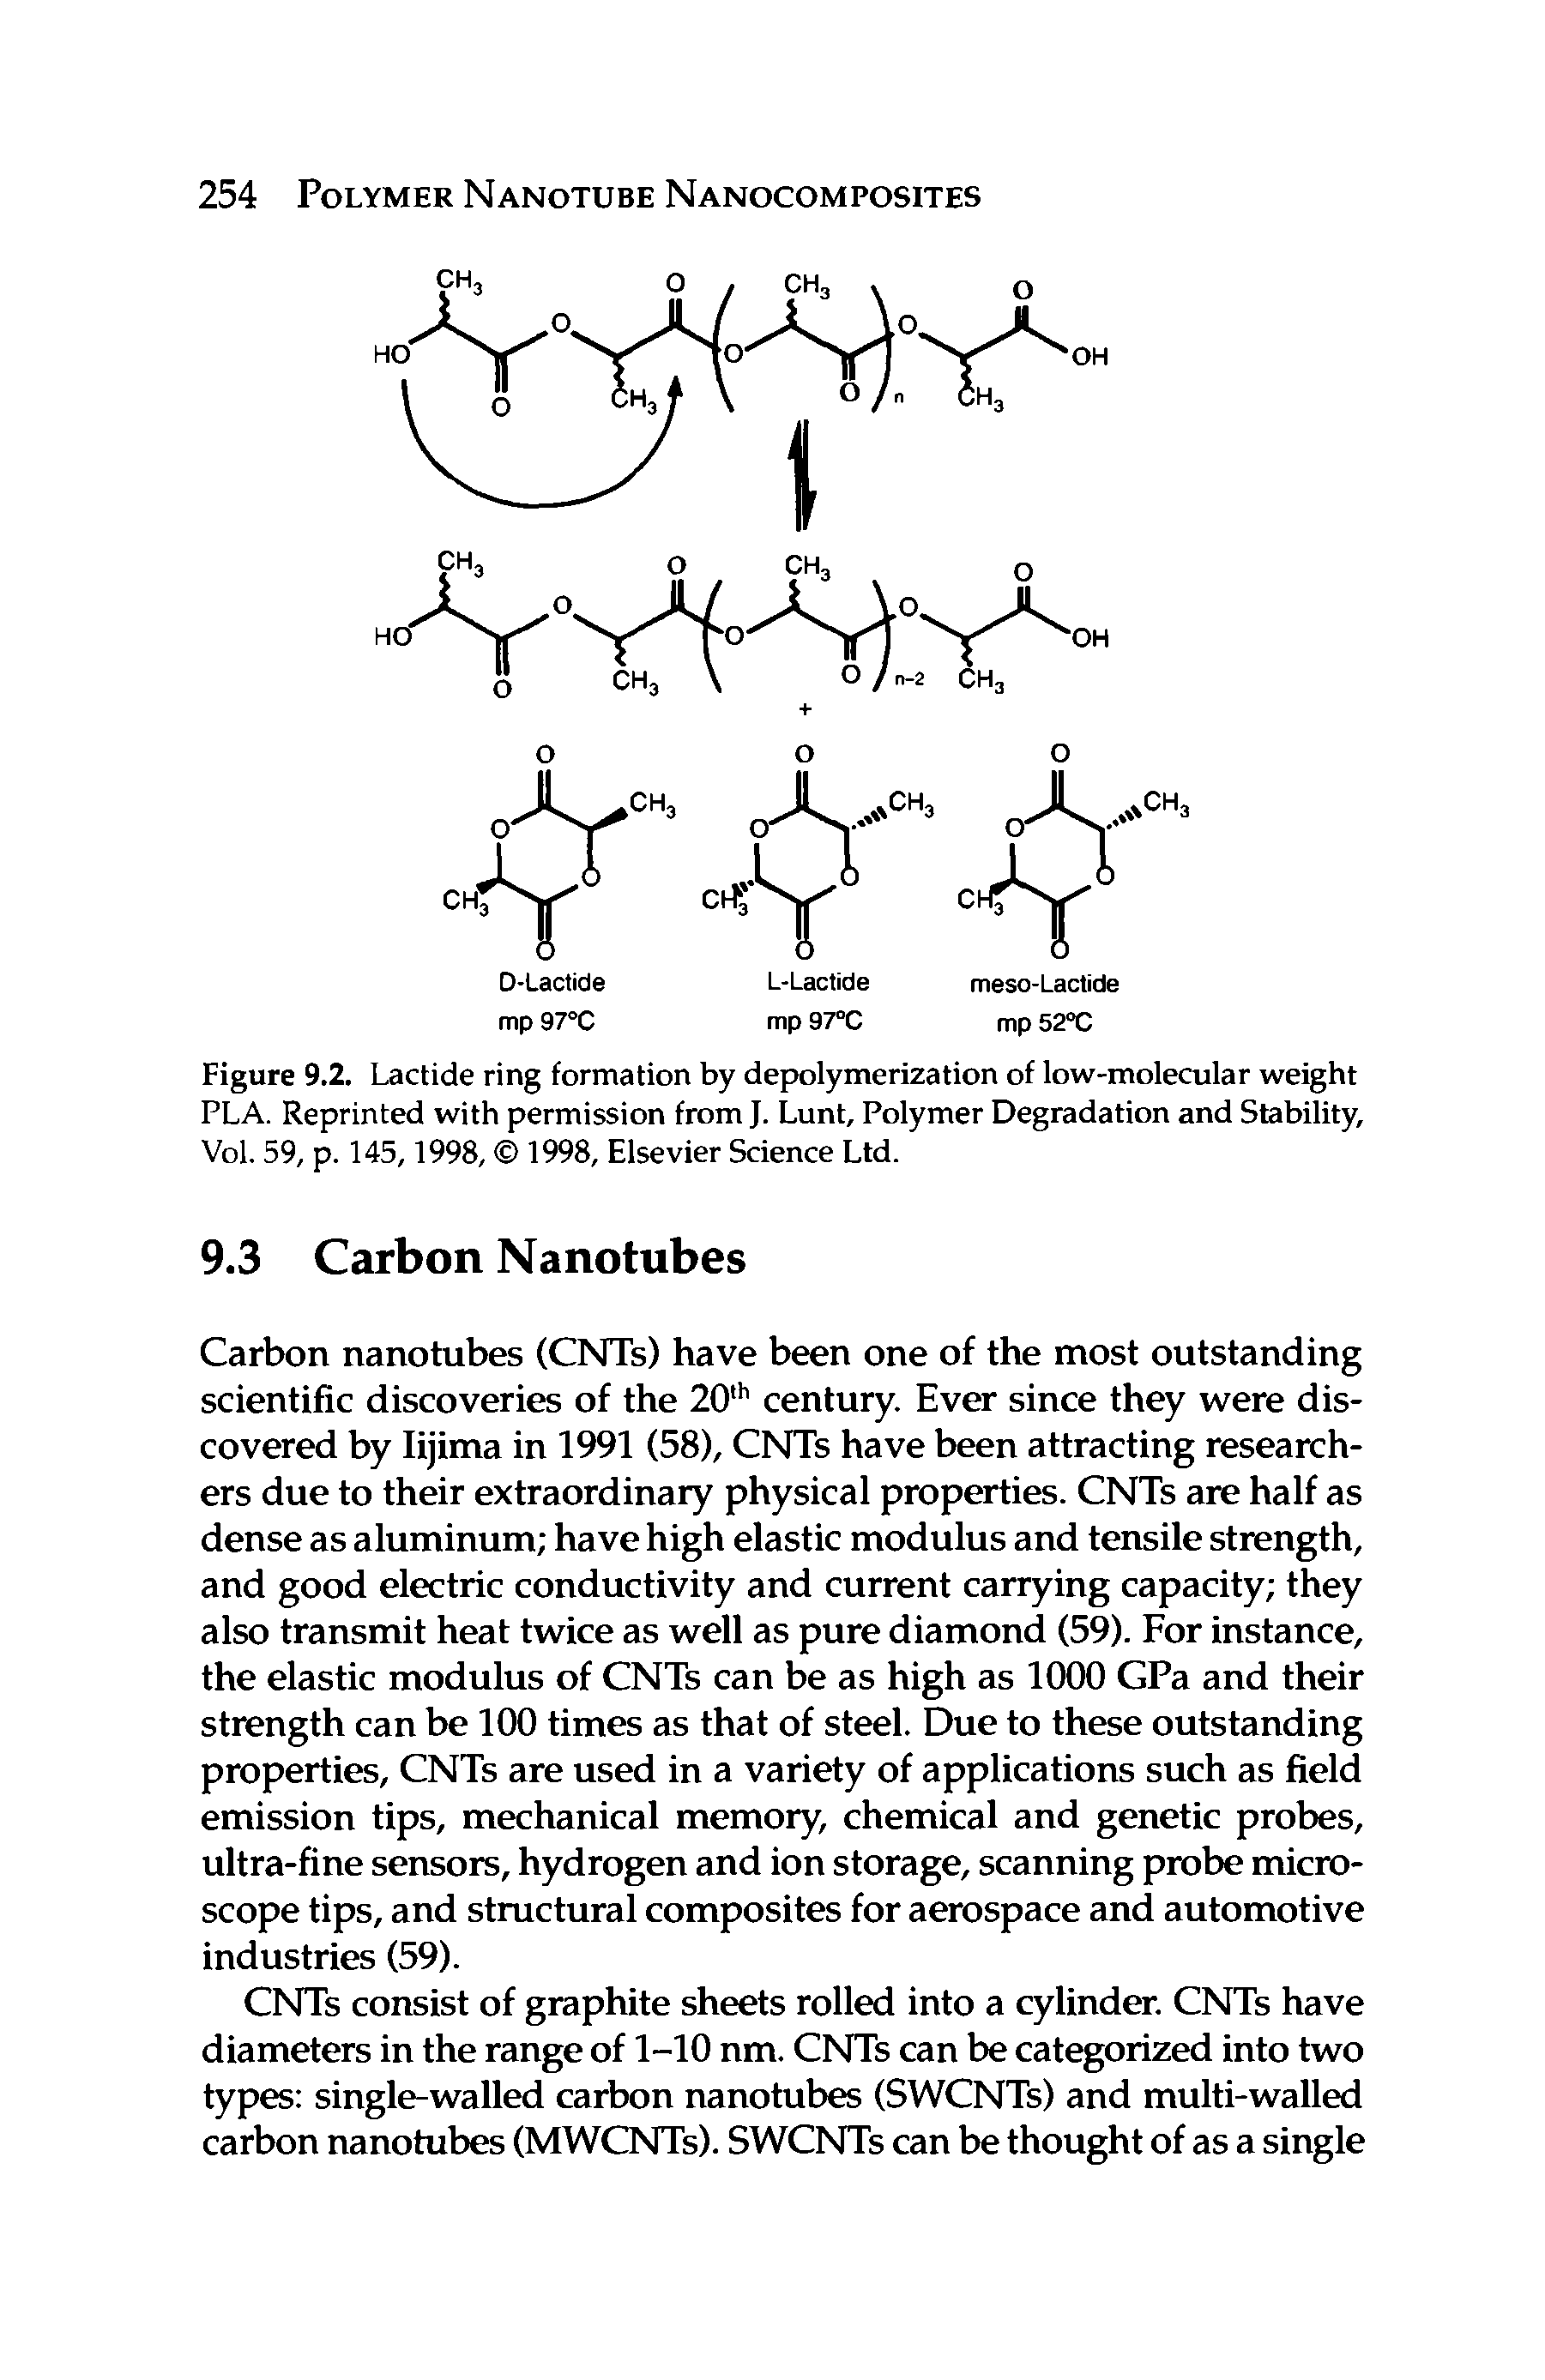 Figure 9.2. Lactide ring formation by depolymerization of low-molecular weight PLA. Reprinted with permission from J. Lunt, Polymer Degradation and Stability, Vol. 59, p. 145,1998, 1998, Elsevier Science Ltd.